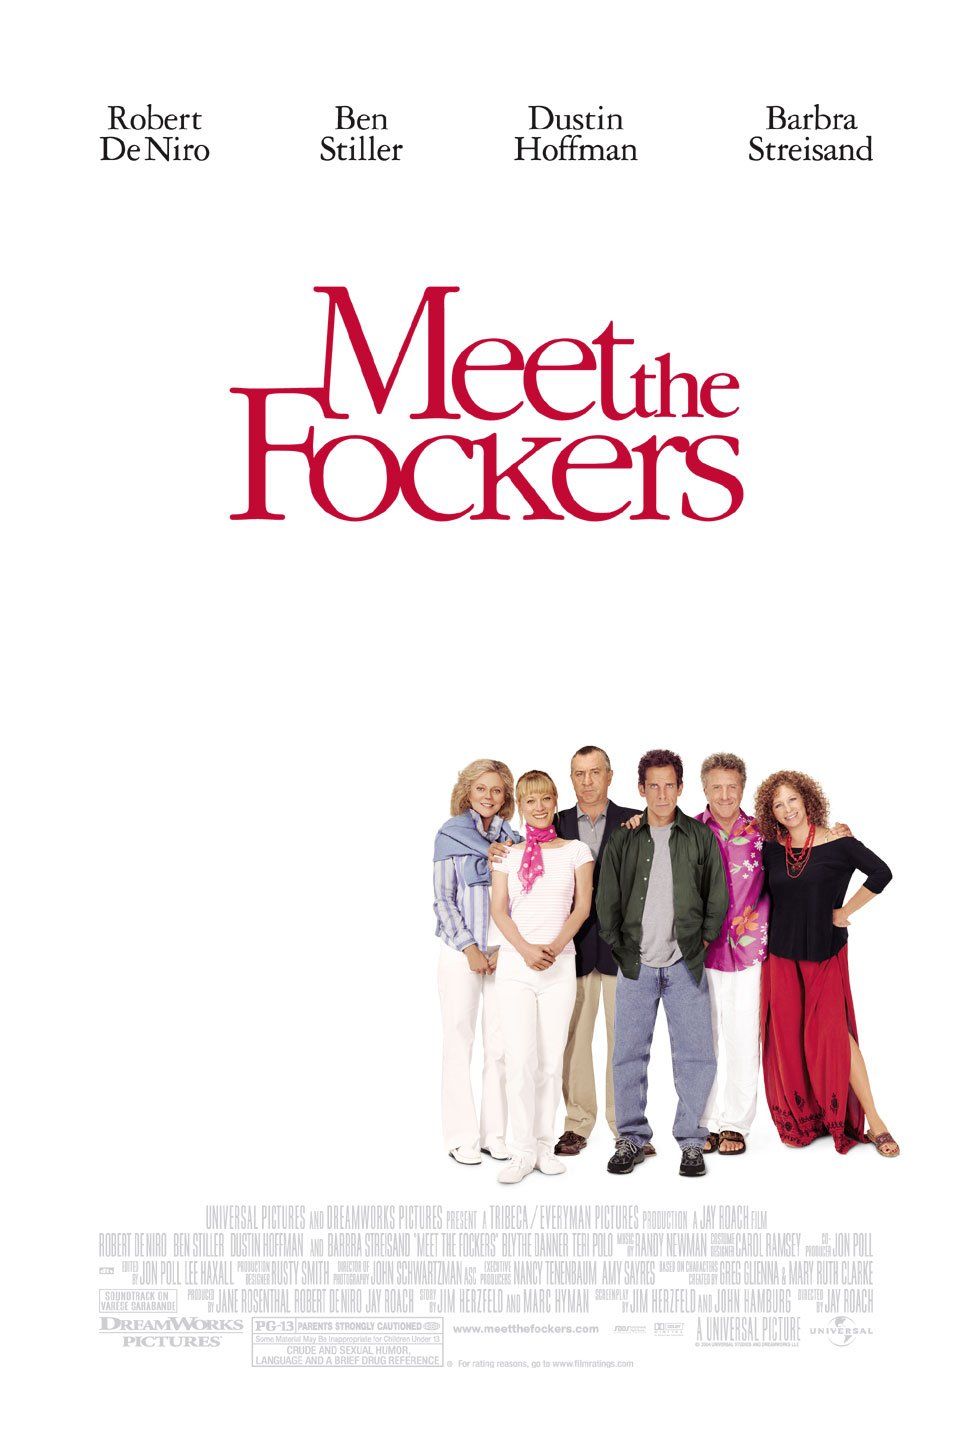 Meet the Fockers U.S. theatrical poster.